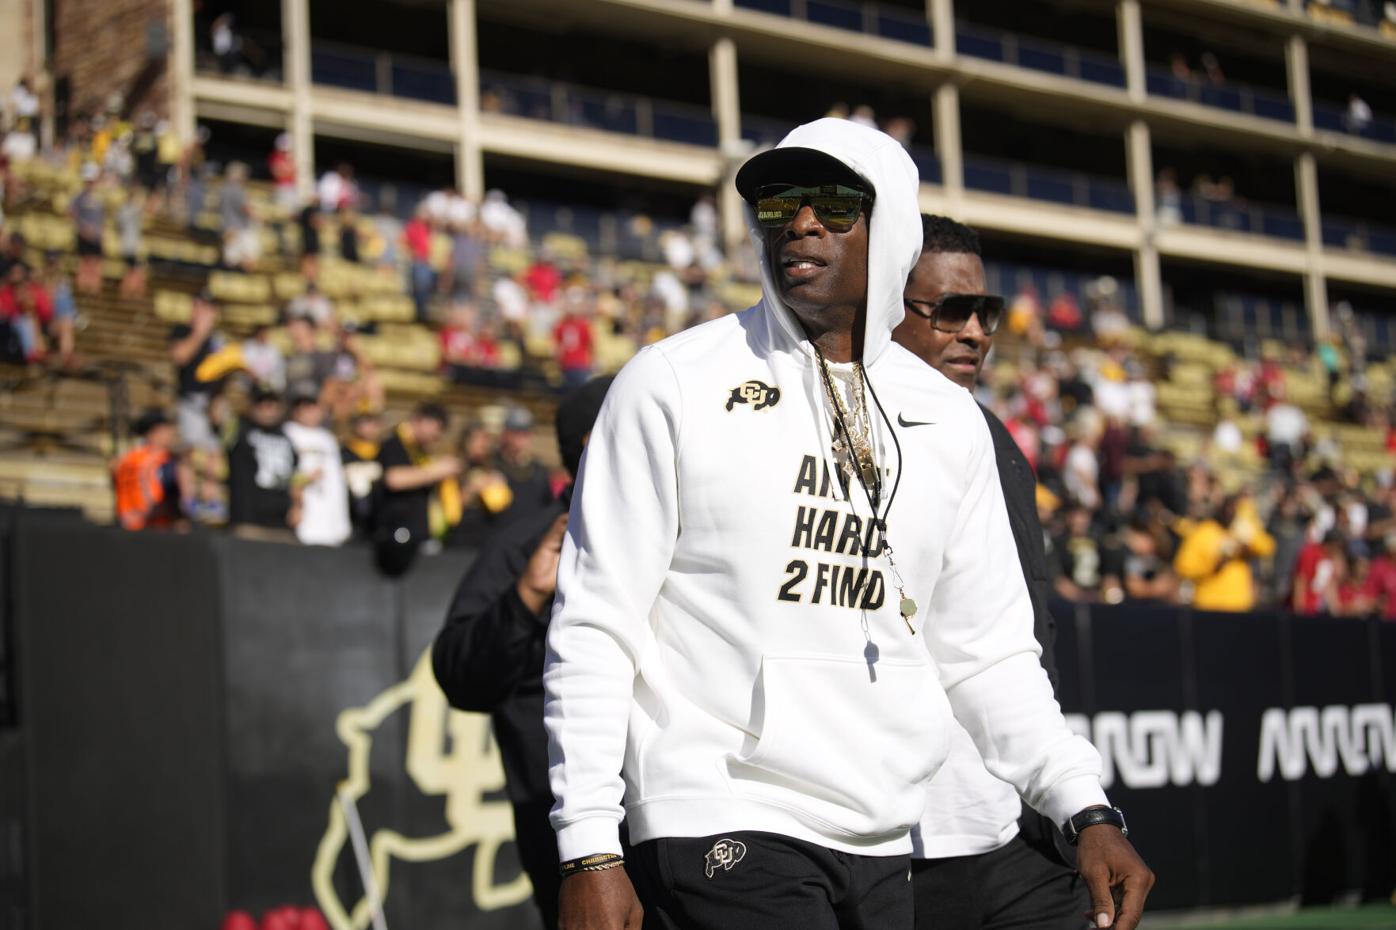 Deion Sanders made history at Jackson State, but Colorado came calling